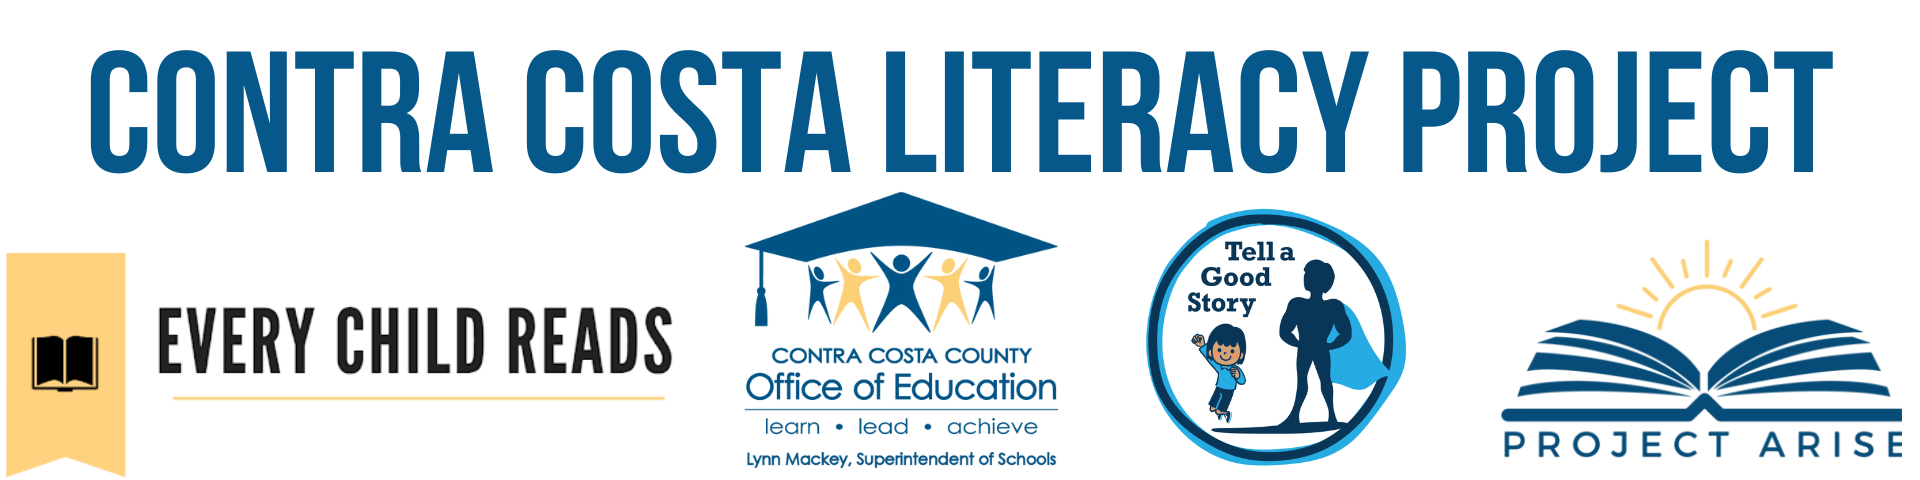 Contra Costa Literacy Project logo